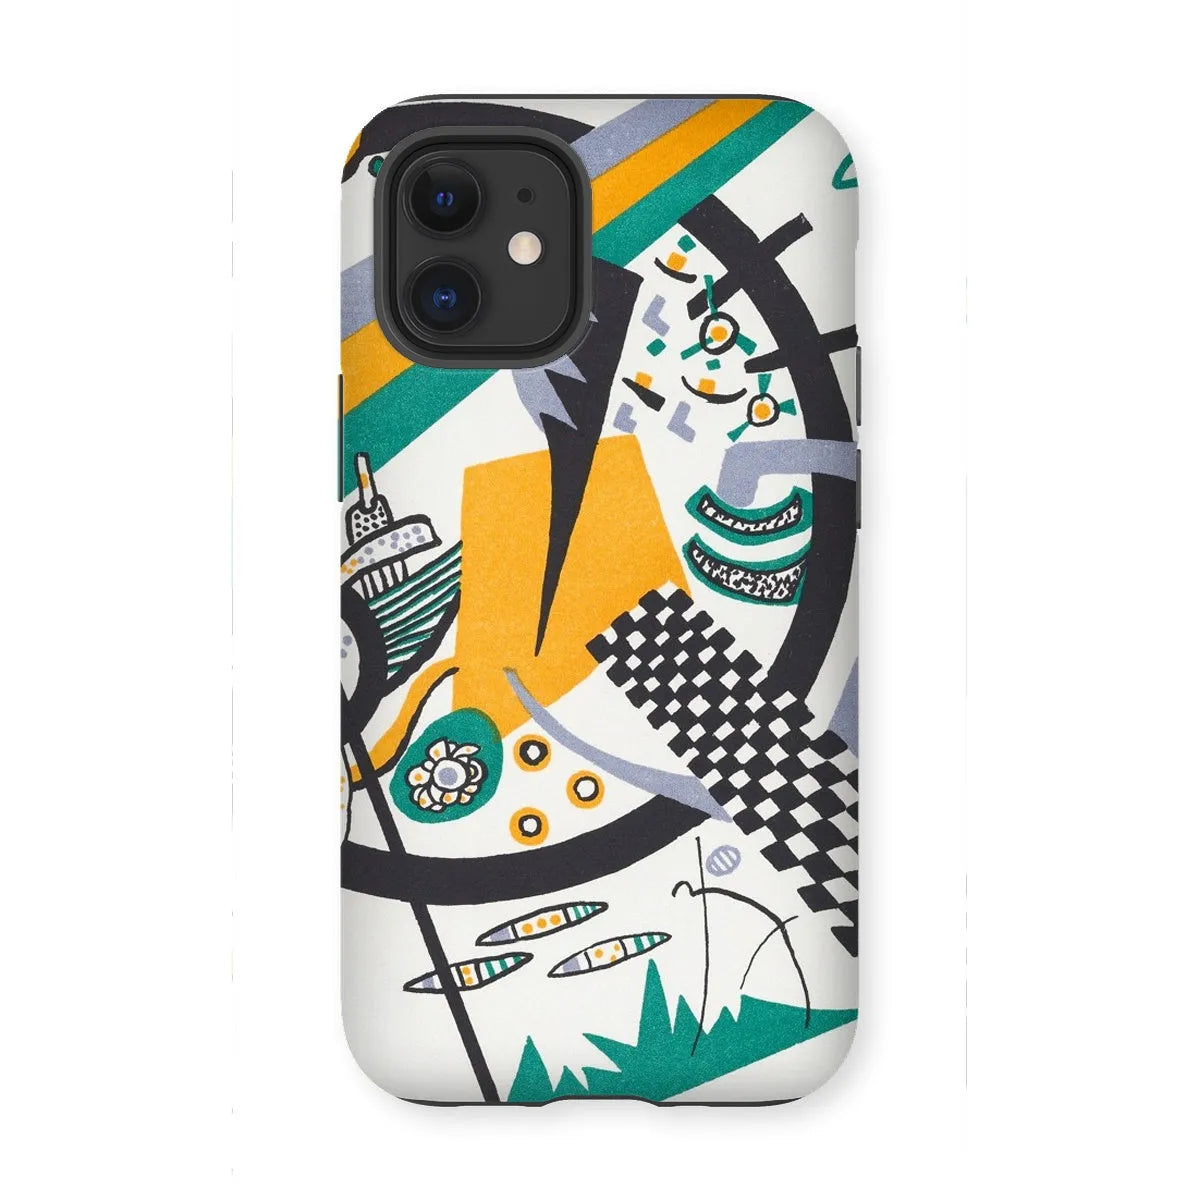 Small Worlds Iv - Expressionist Phone Case - Wassily Kandinsky - Iphone 12 Mini / Matte - Mobile Phone Cases